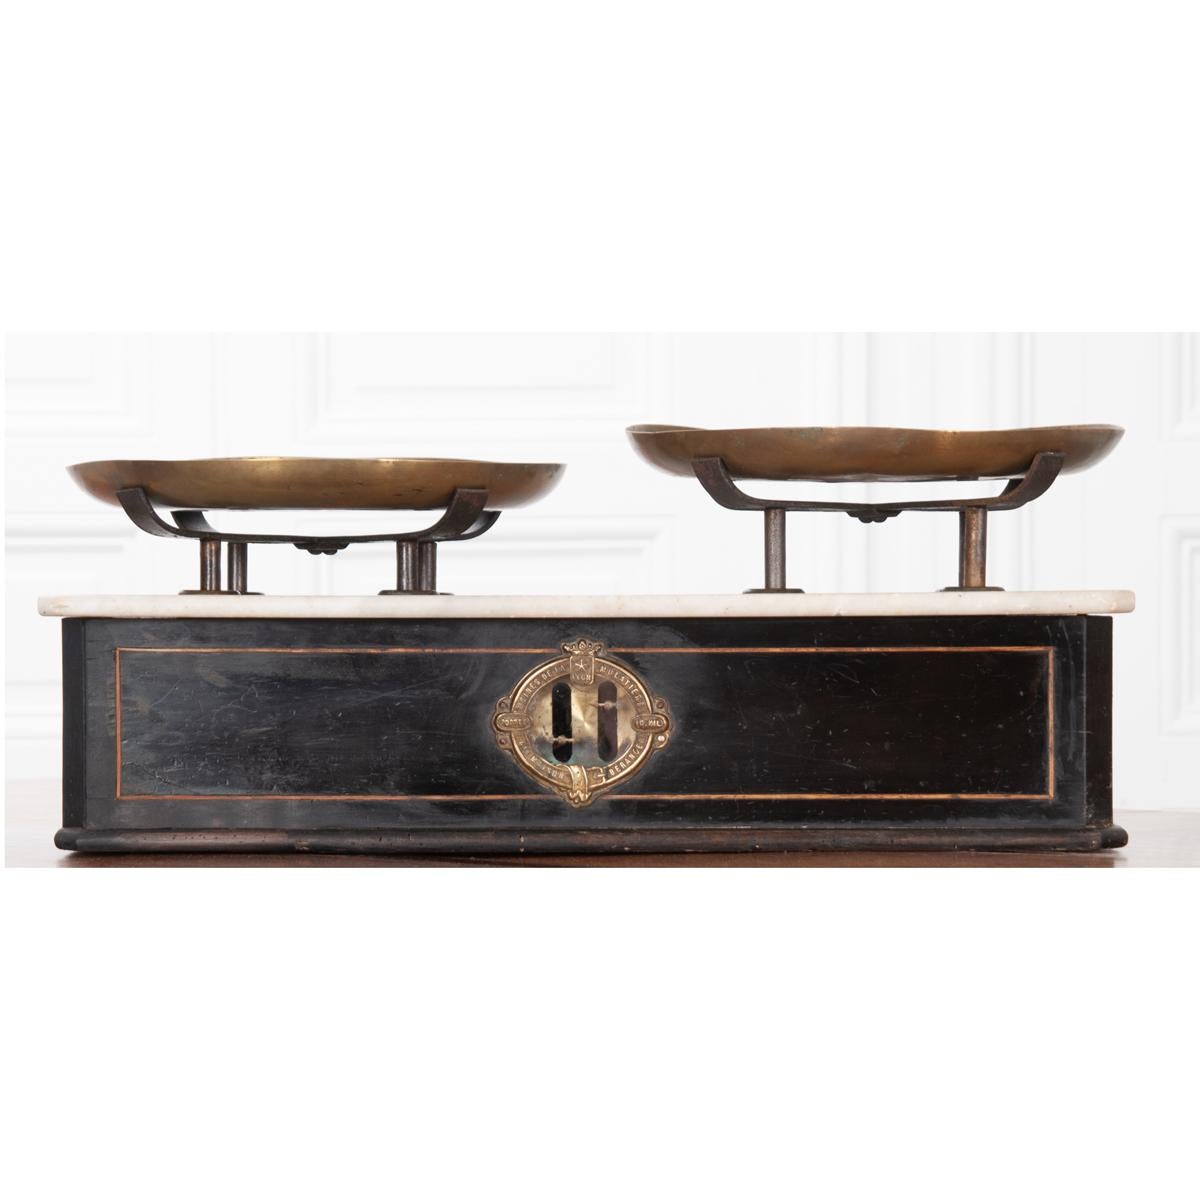 Large French 19th century culinary scale. Registered trademark of Usines de la Mulatière, formerly Maison Béranger (Lyon, France), c. 1870. The box is made of ebonized wood with a simple inlaid rectangle on each side and the weighing plates are in